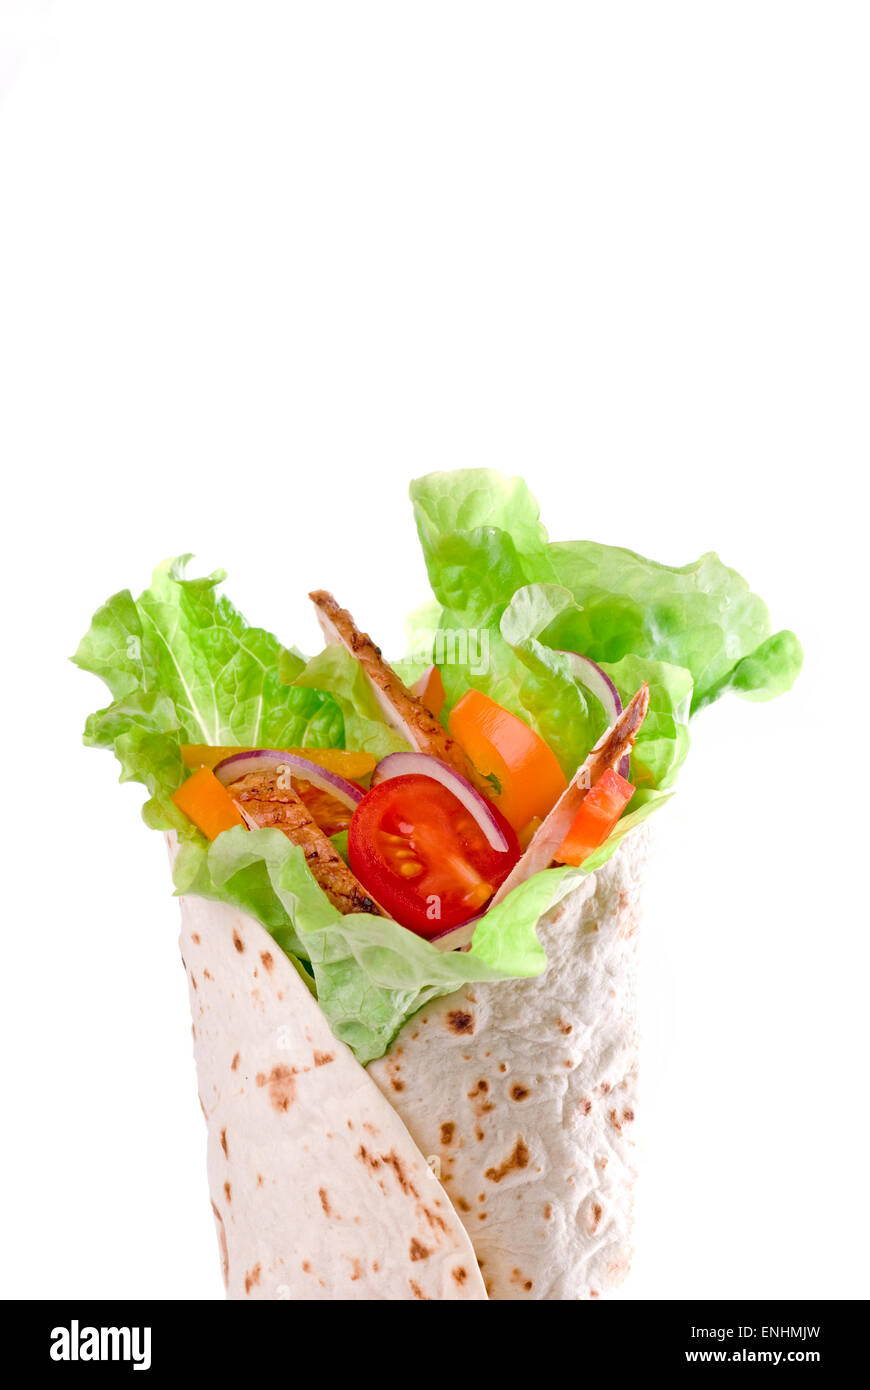 Tortilla wrap with vegetables and meat. Stock Photo